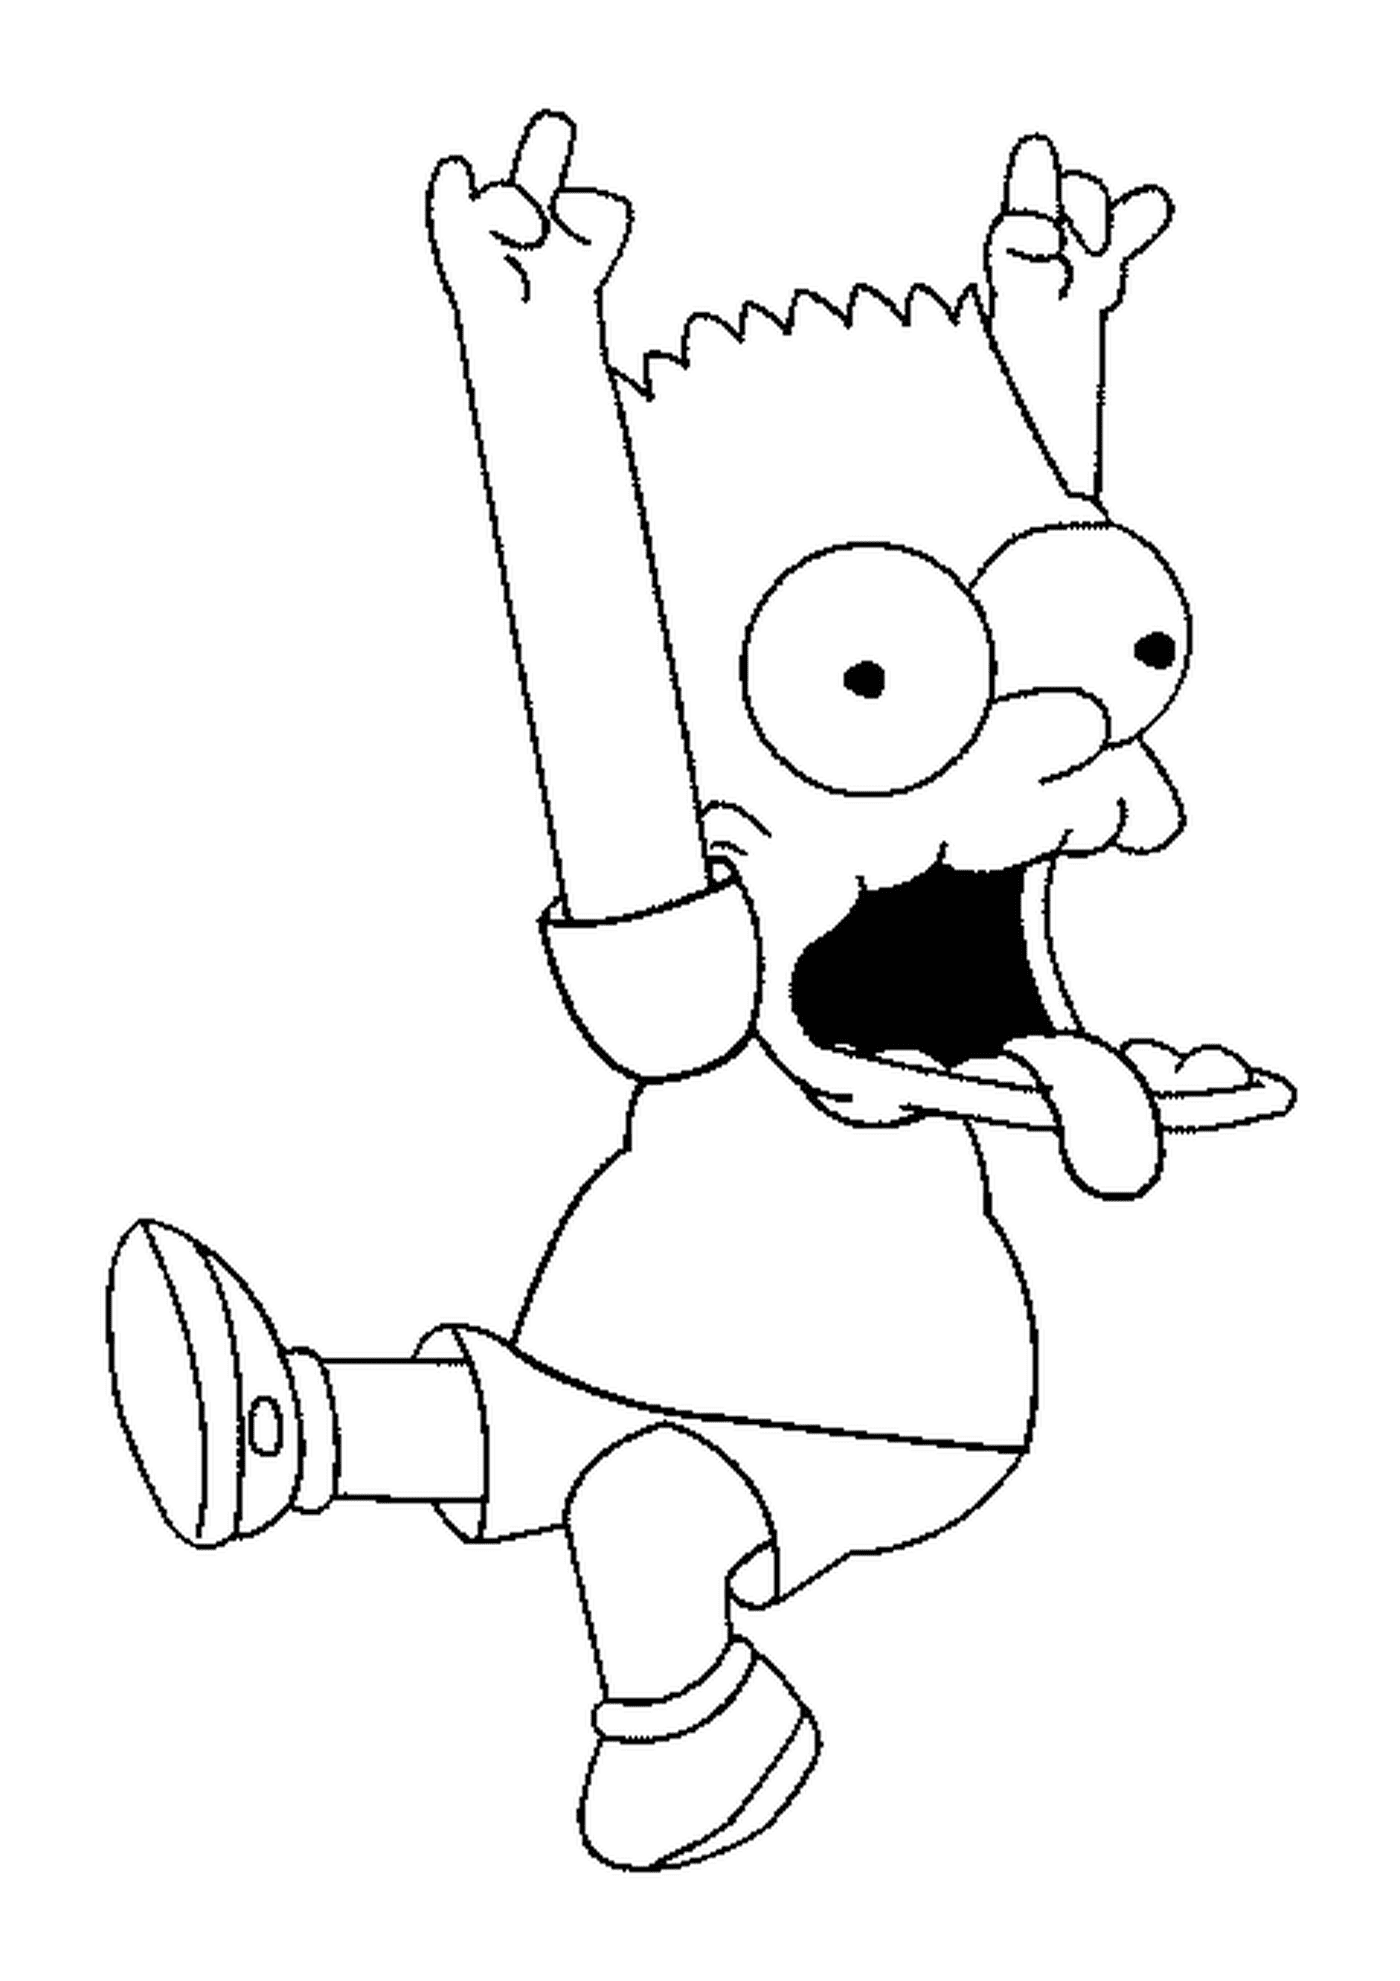  Bart makes a grimace with his arms in the air 